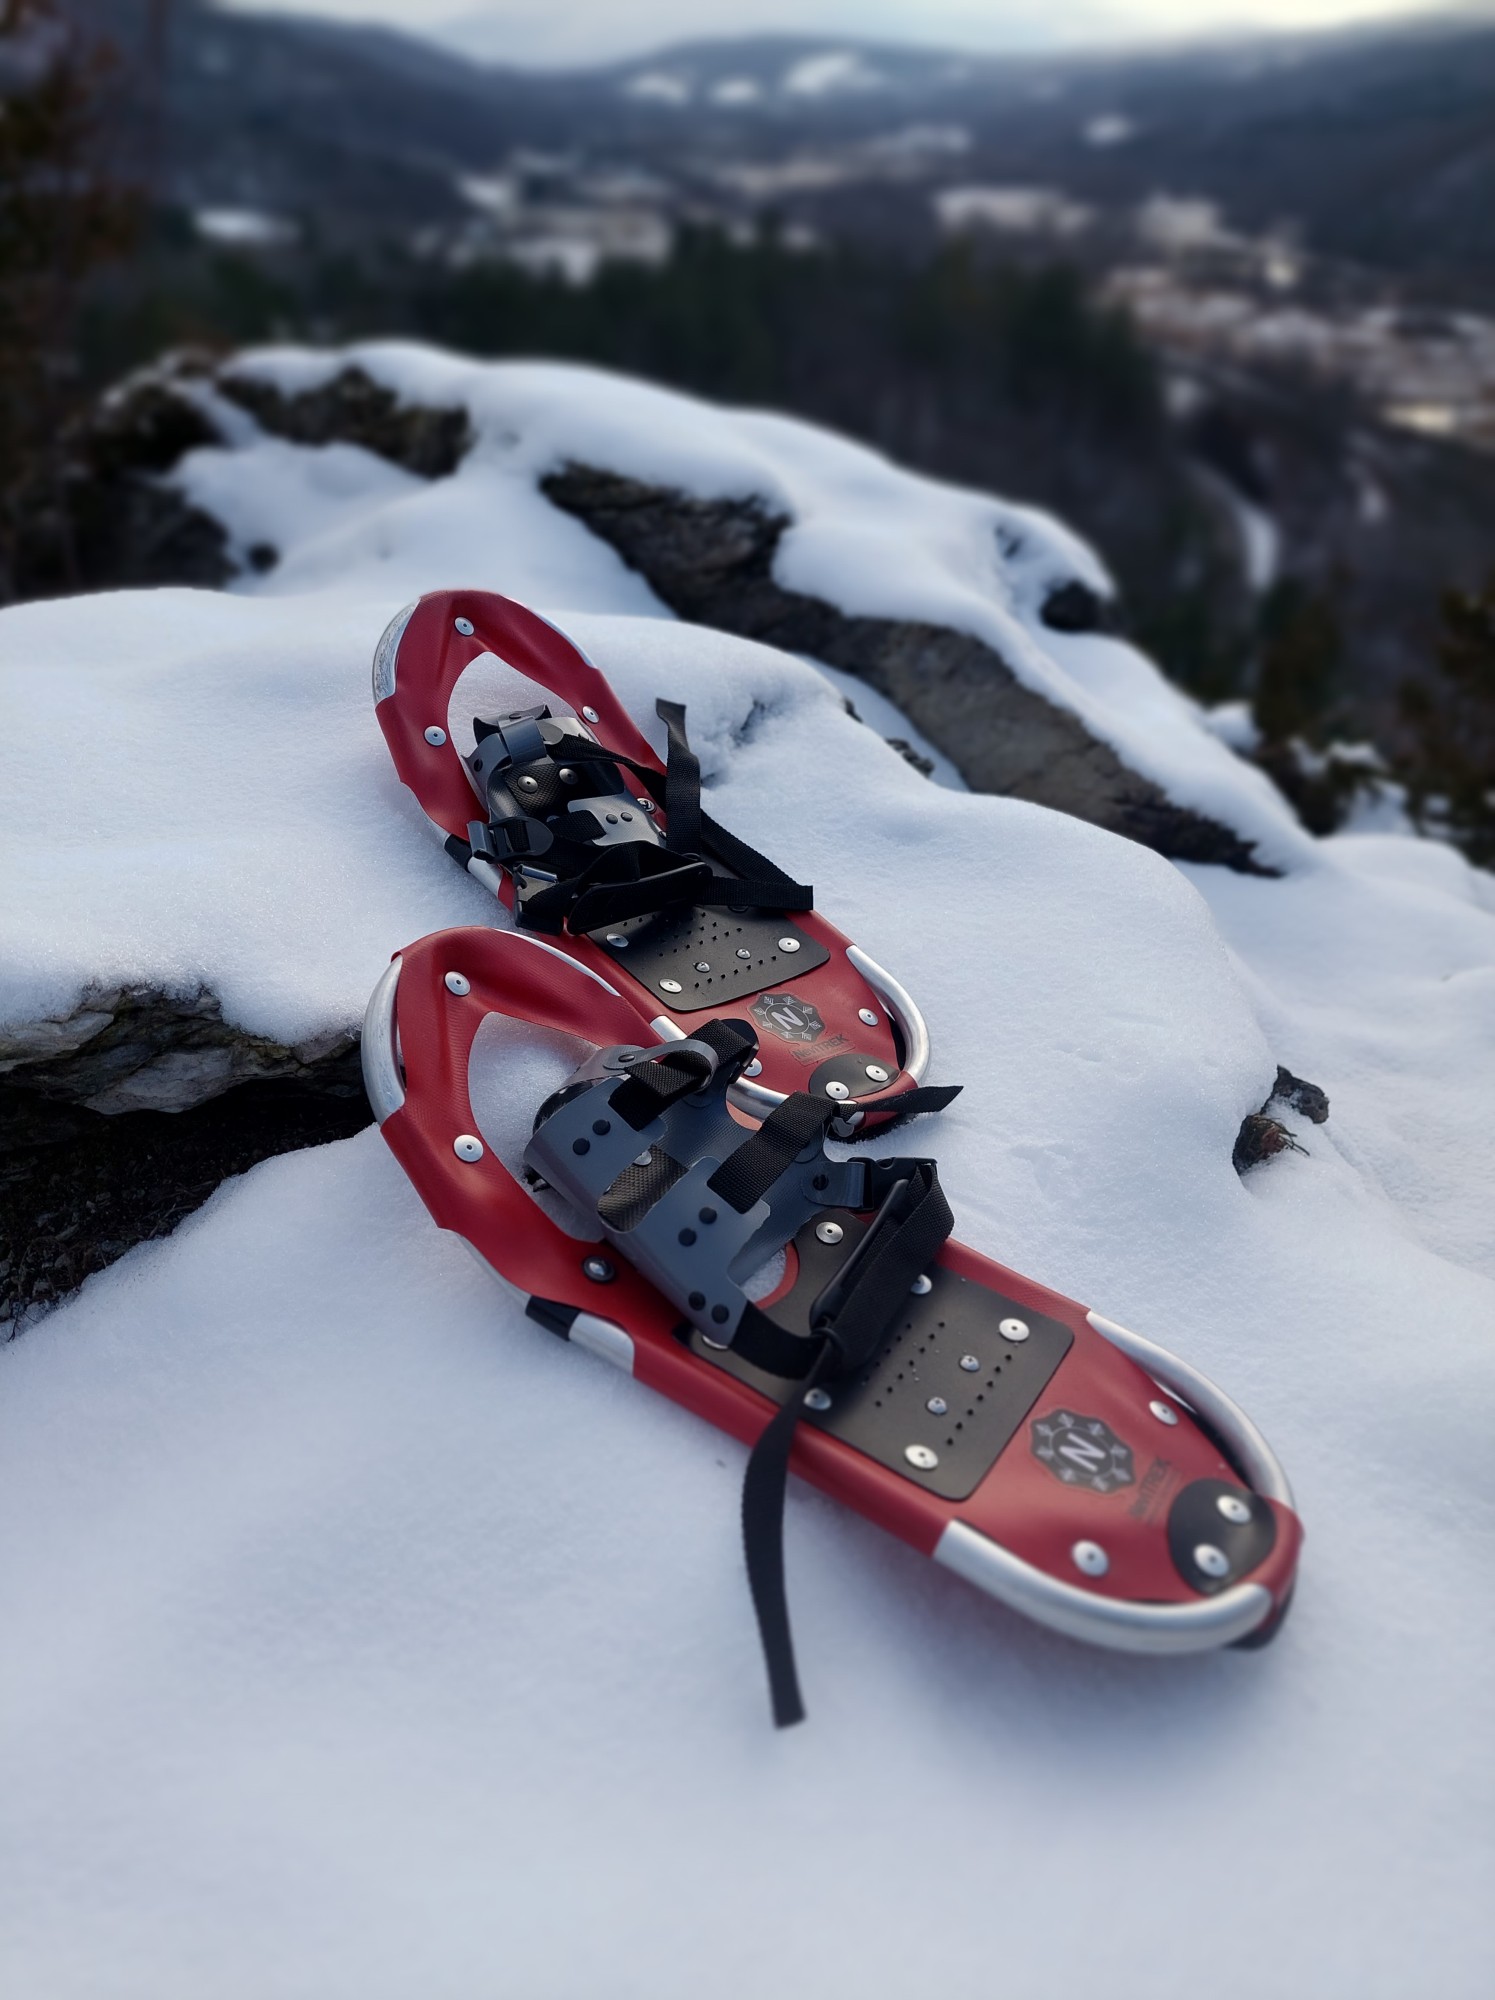 NeviTREK snowshoes on snow with mountains in background